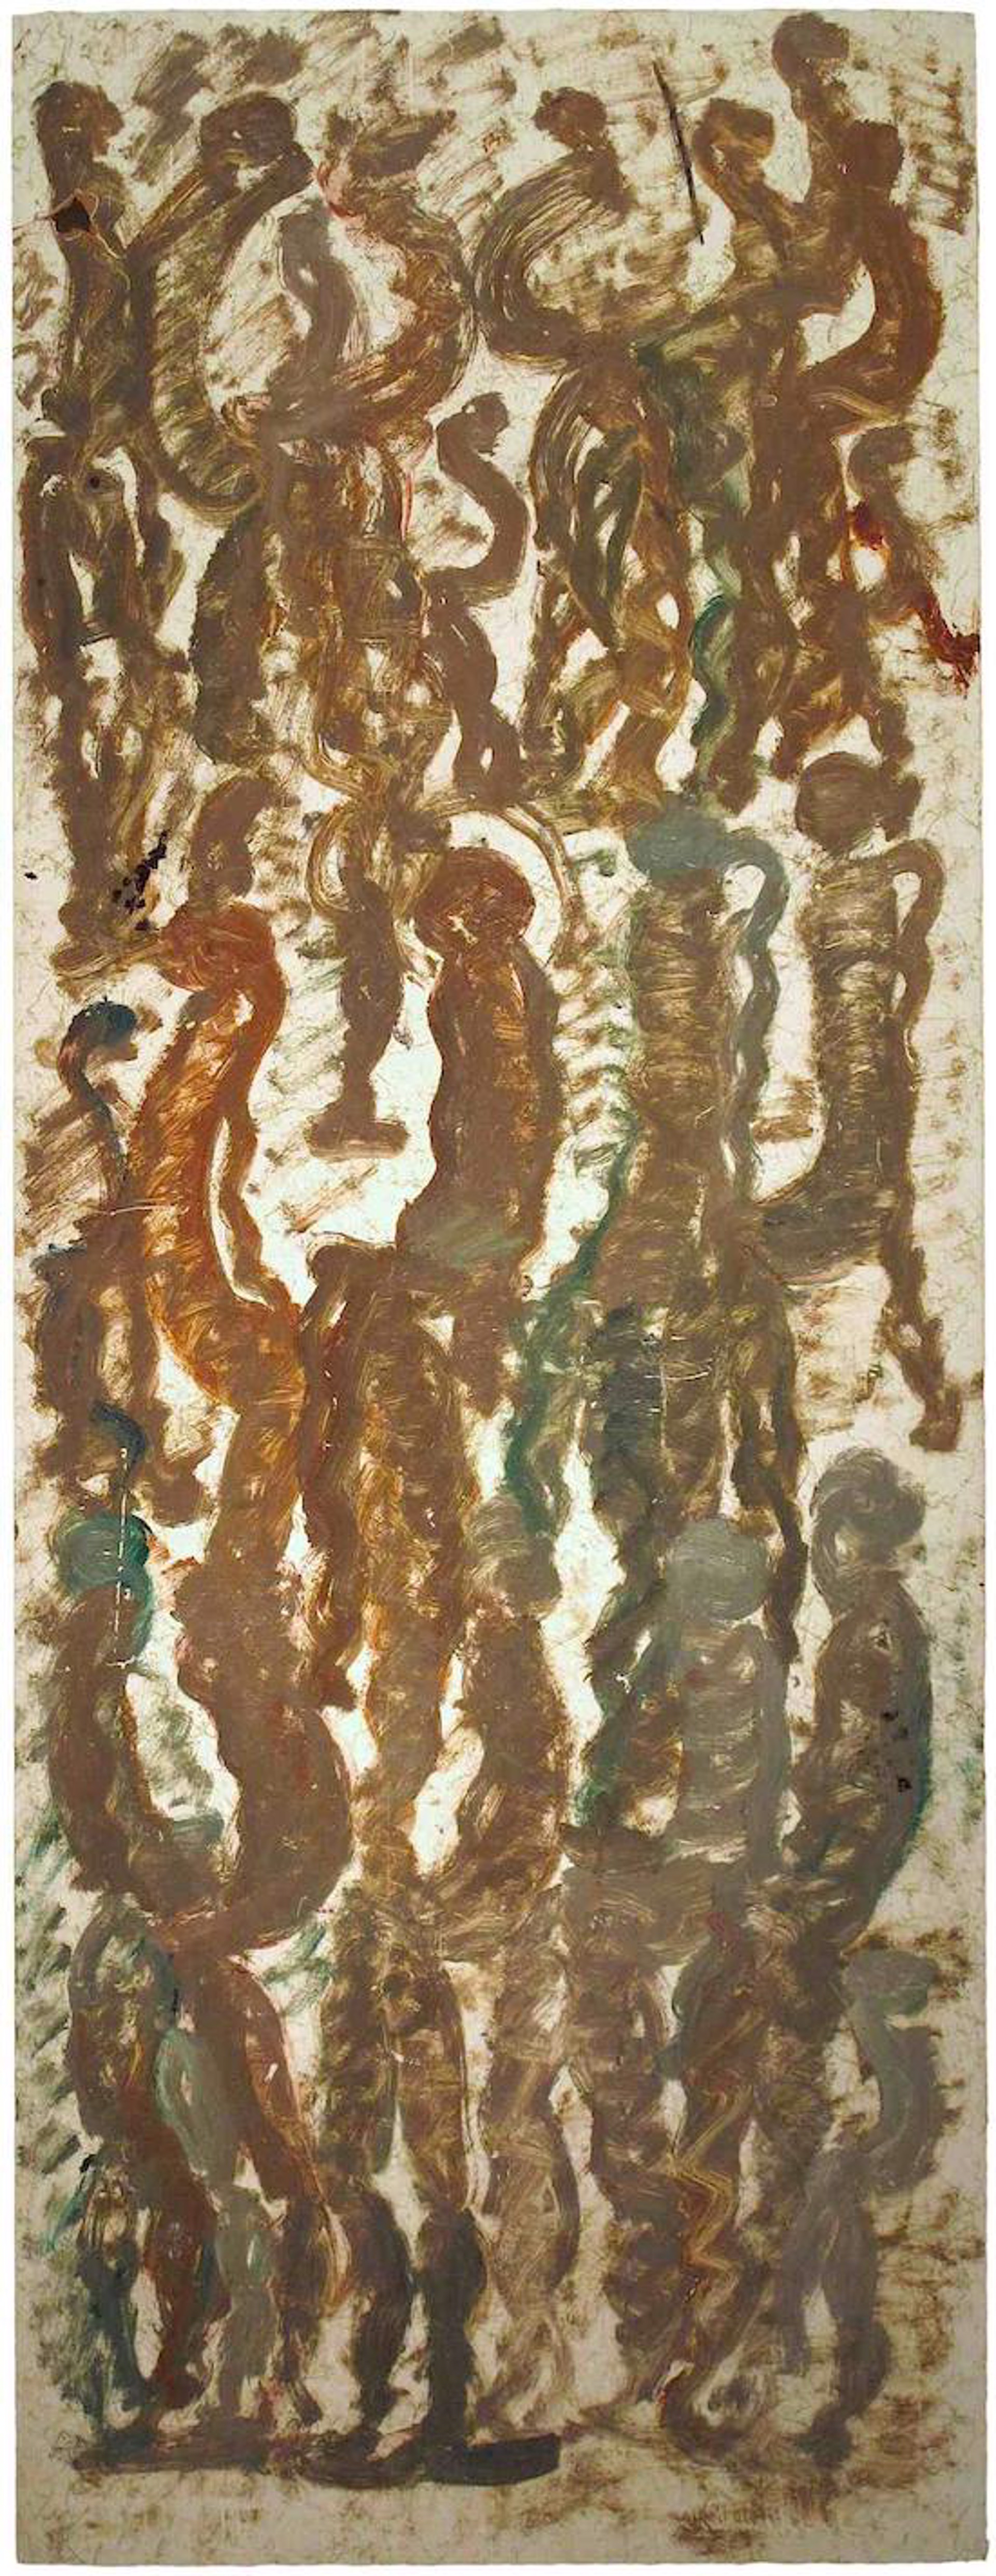 Brown Figures in Abstract by Purvis Young